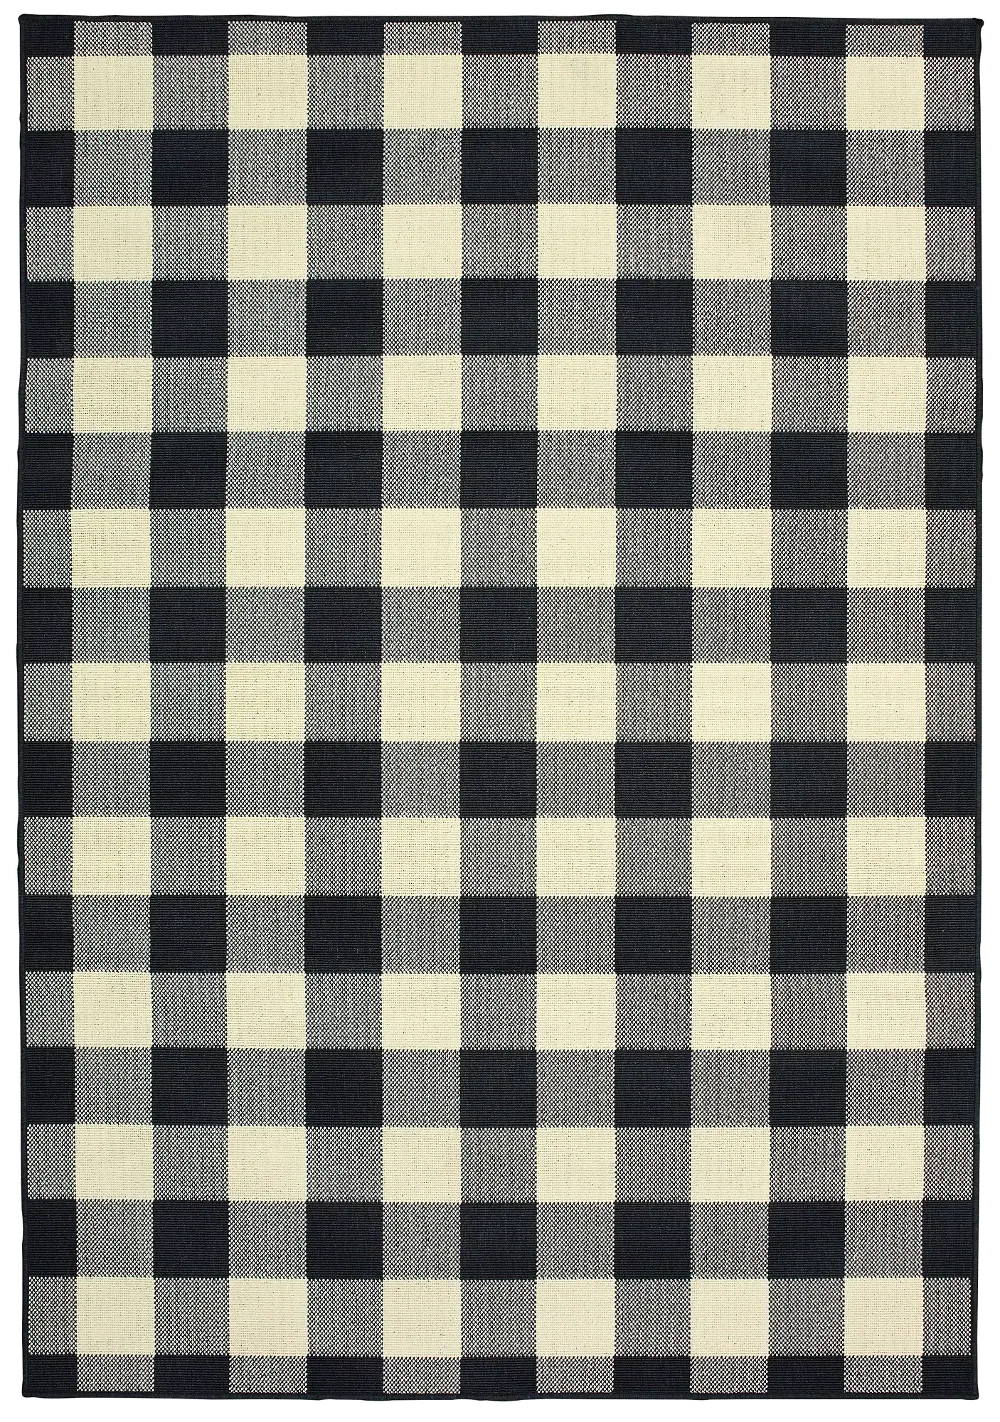 8 x 11 Large Plaid Black and Ivory Indoor-Outdoor Rug - Marina-1